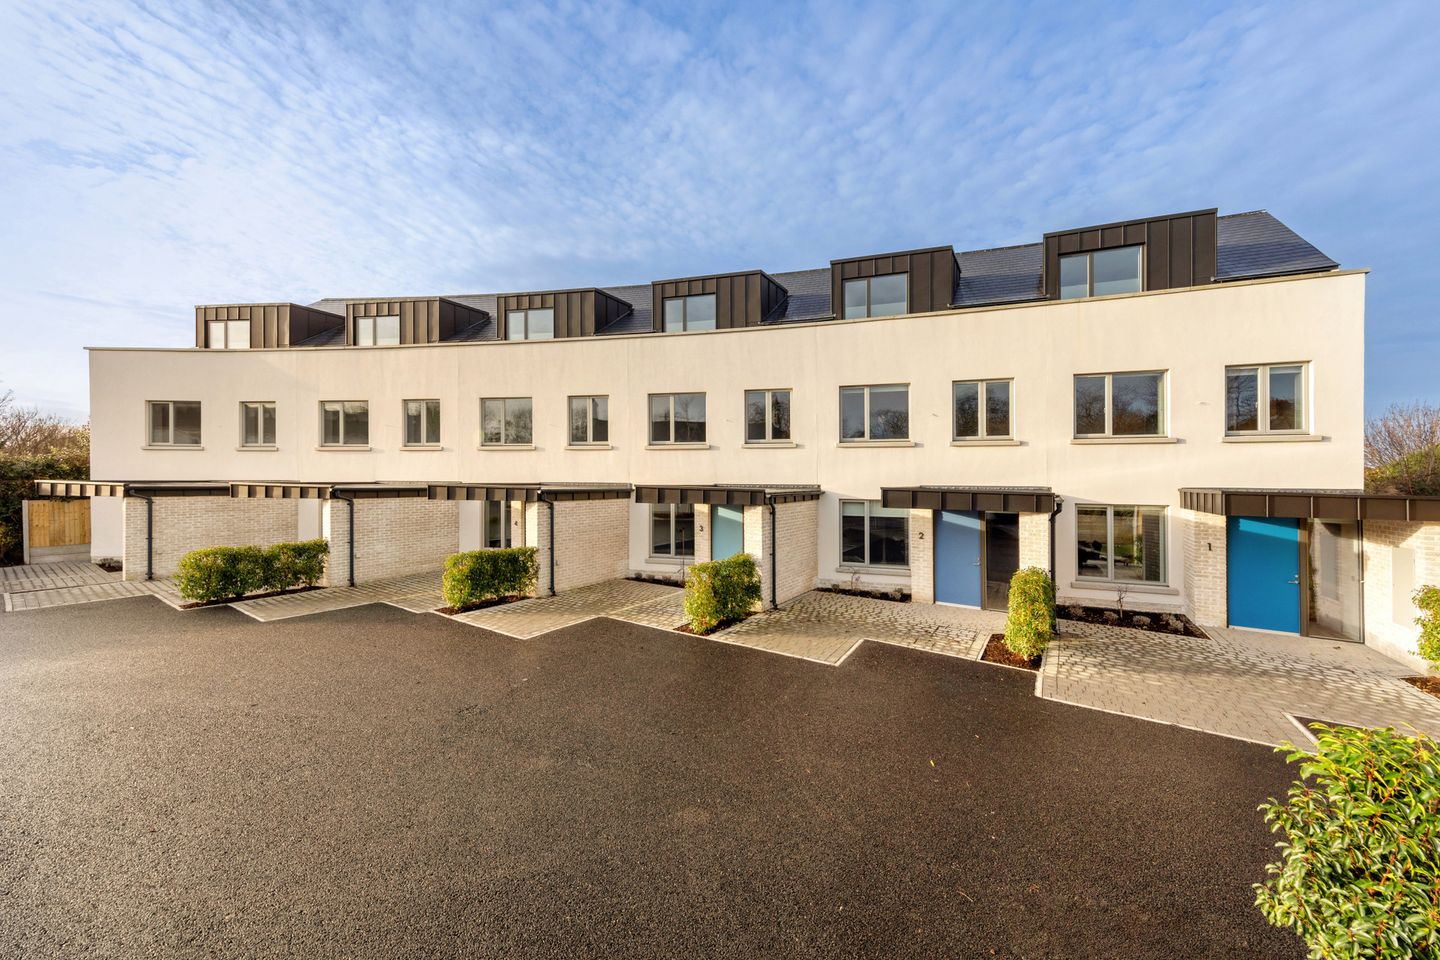 3 Bedroom Luxurious Family Homes, Chandos Lane, 3 Bedroom Luxurious Family Homes, Chandos Lane, Dundrum Road, Dundrum, Dublin 14